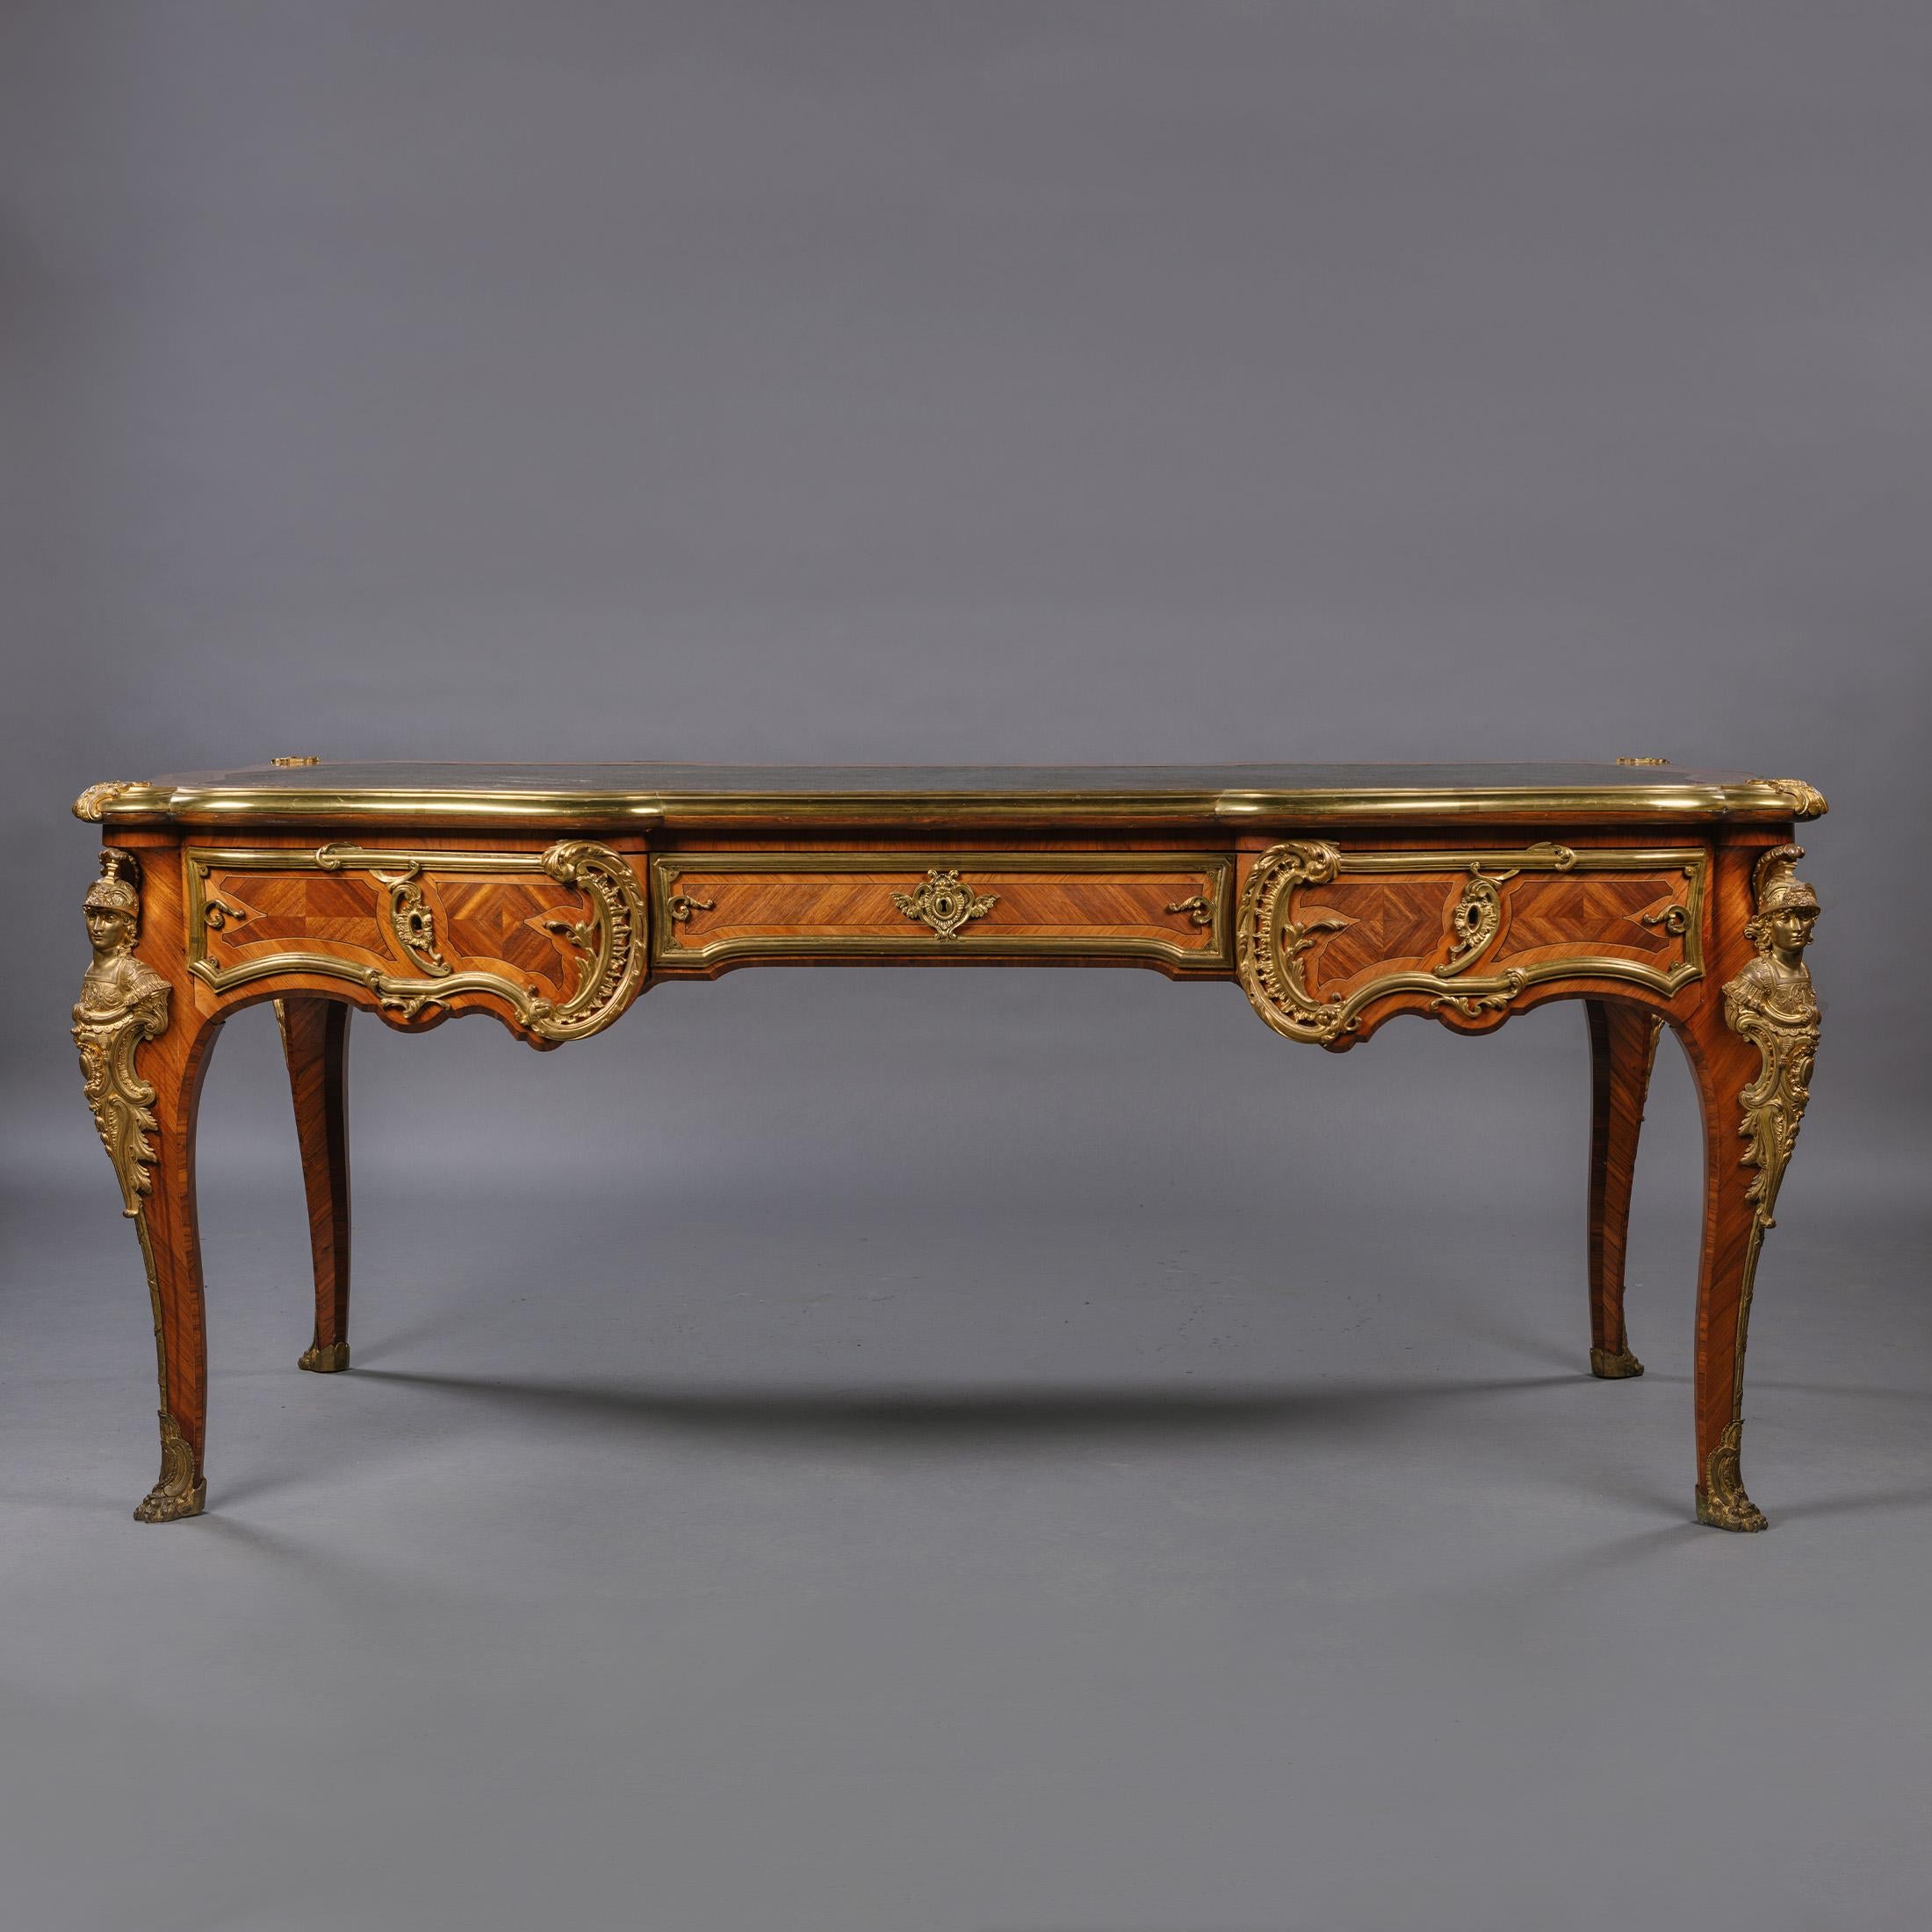 A Louis XV Style gilt-bronze mounted bureau plat by François Linke.

The rectangular top inset with a green leather writing surface with gilt-tooled border, within a gilt-bronze surround above three frieze drawers, the back with simulated drawers,